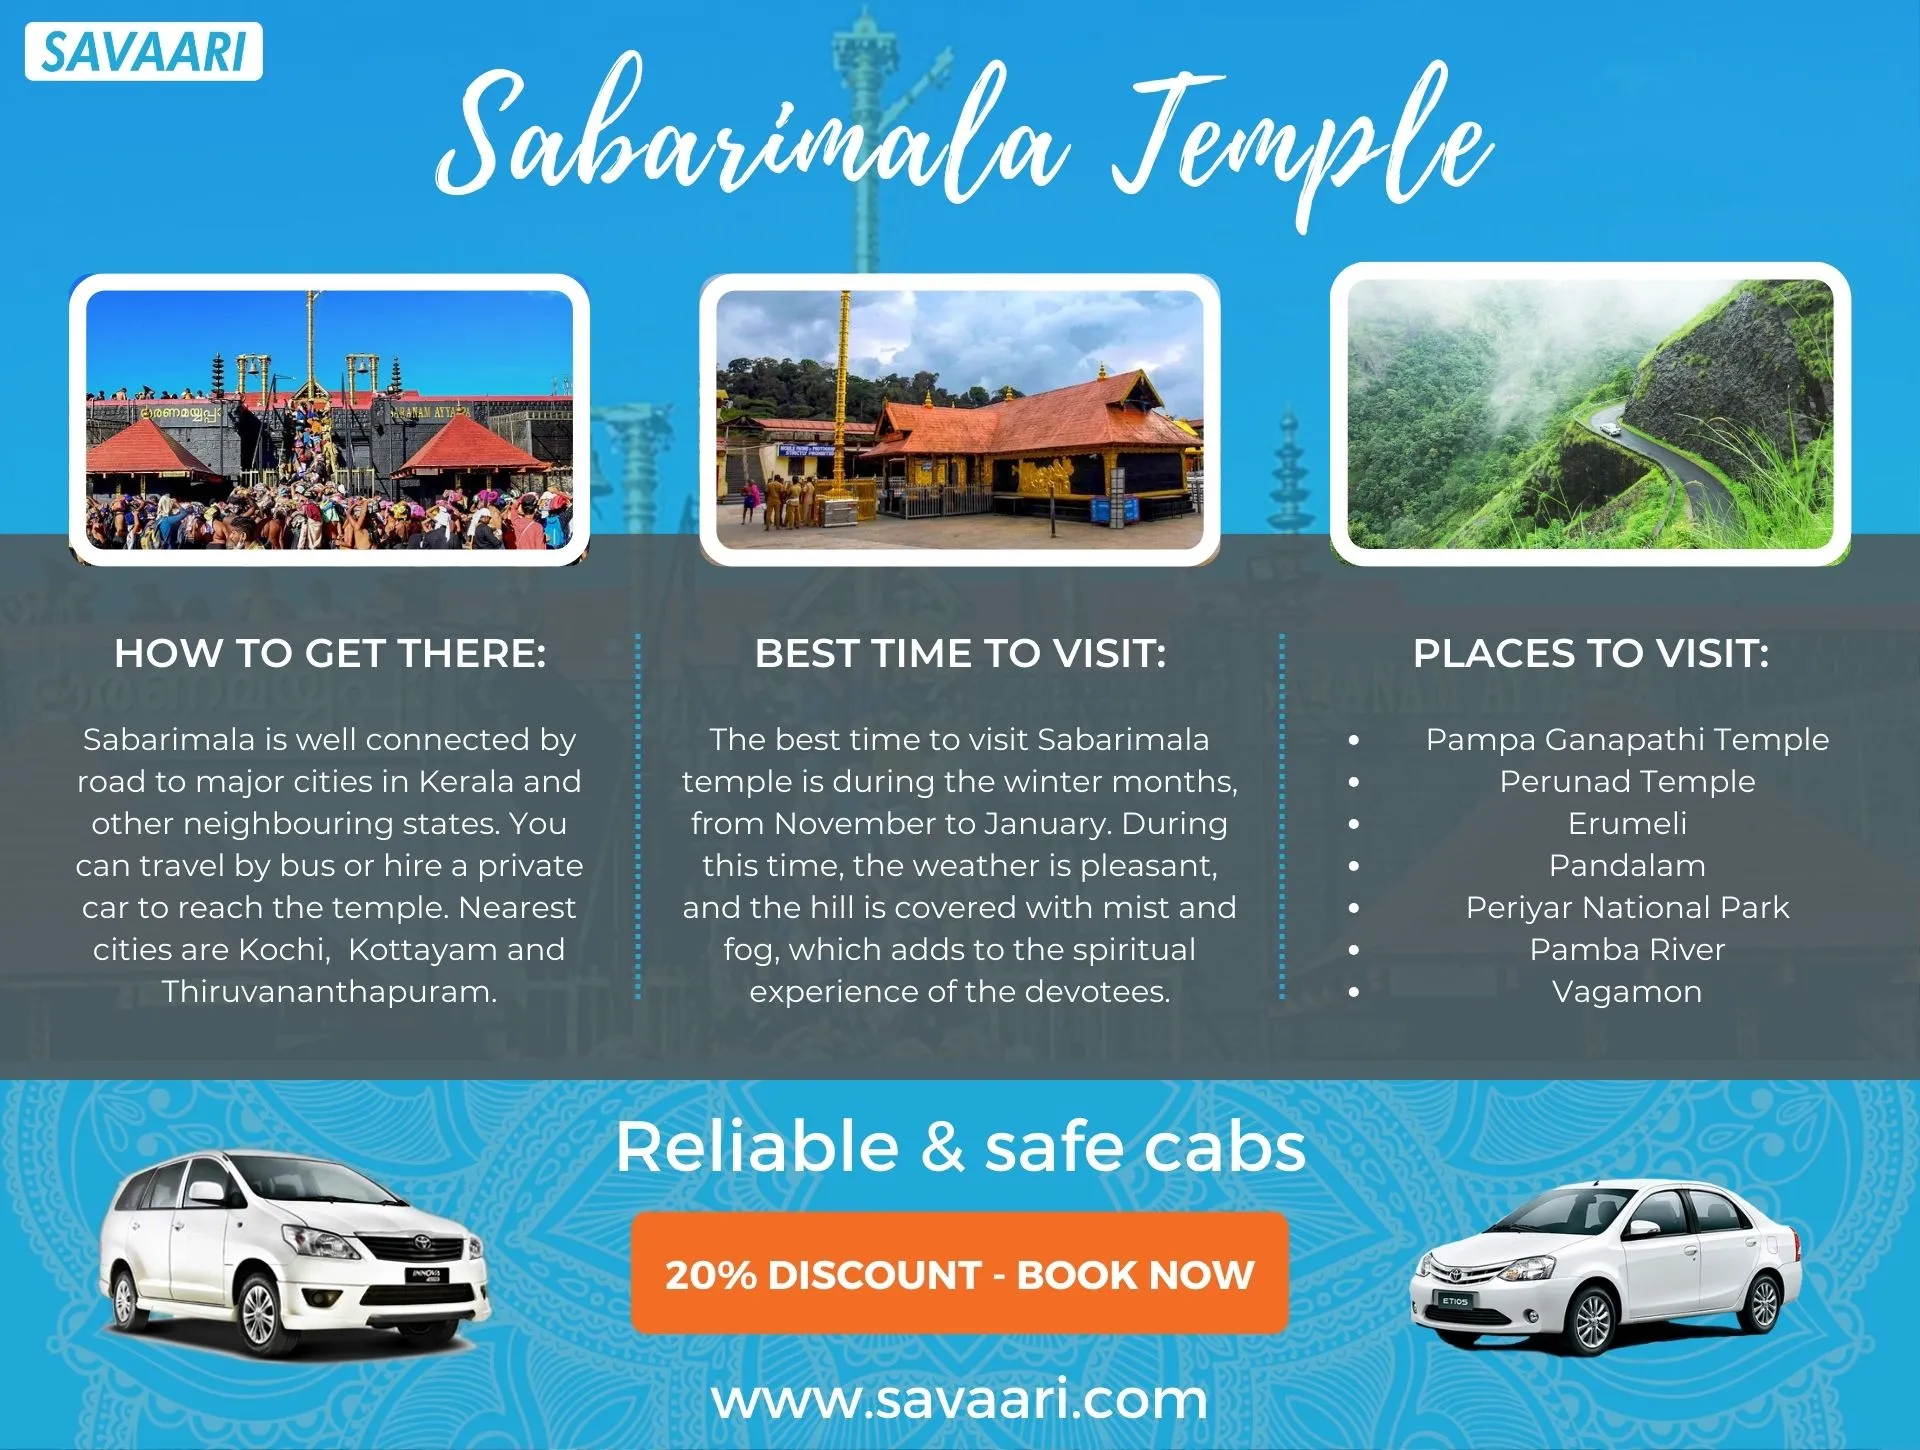 Things to do in Sabarimala Temple